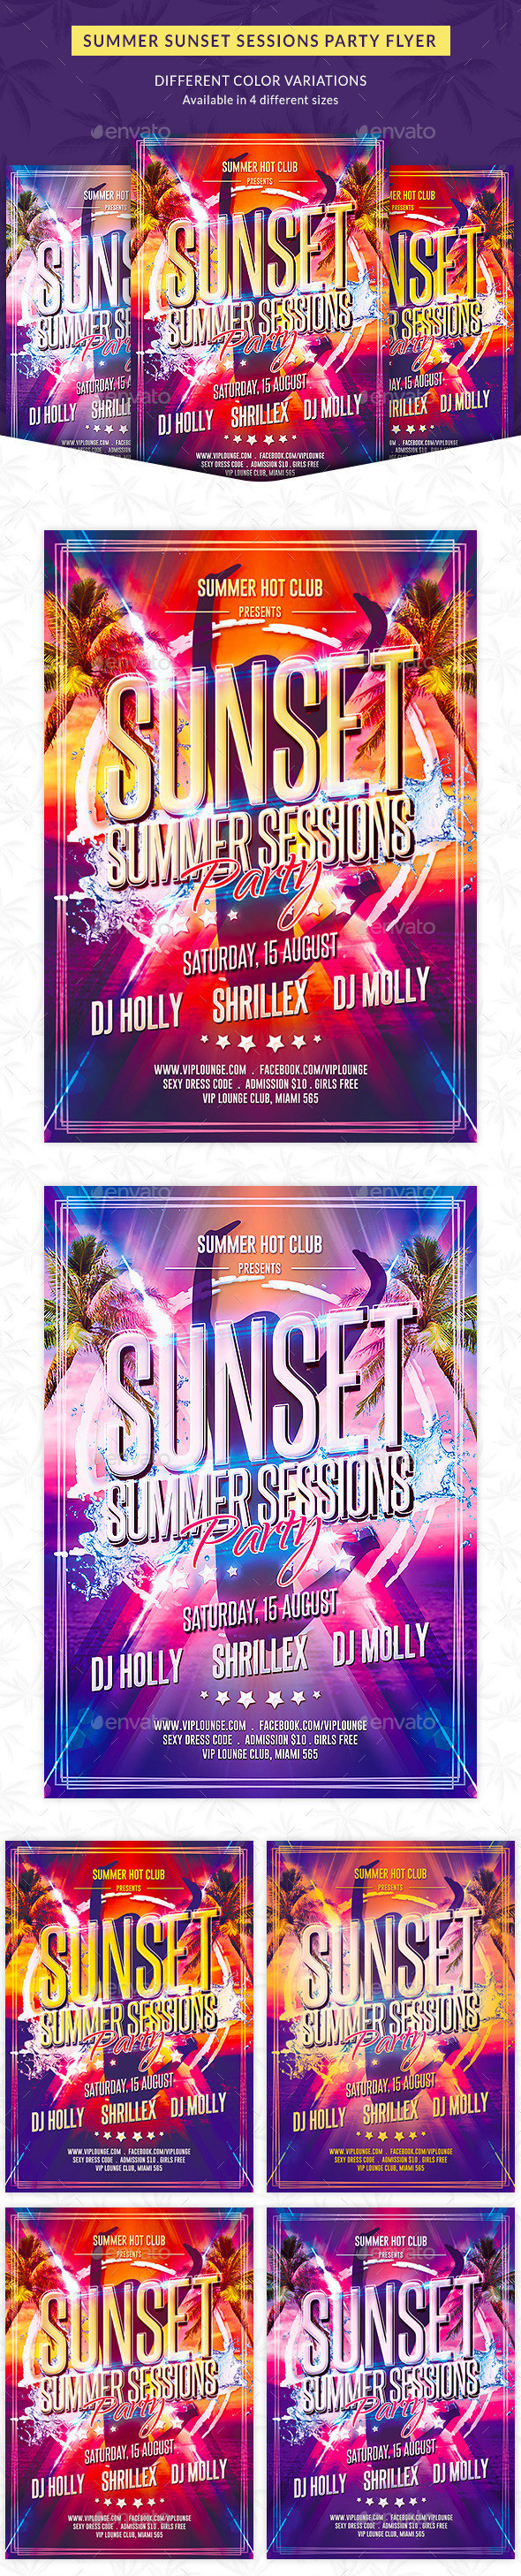 Summer sunset sessions party flyer showcase